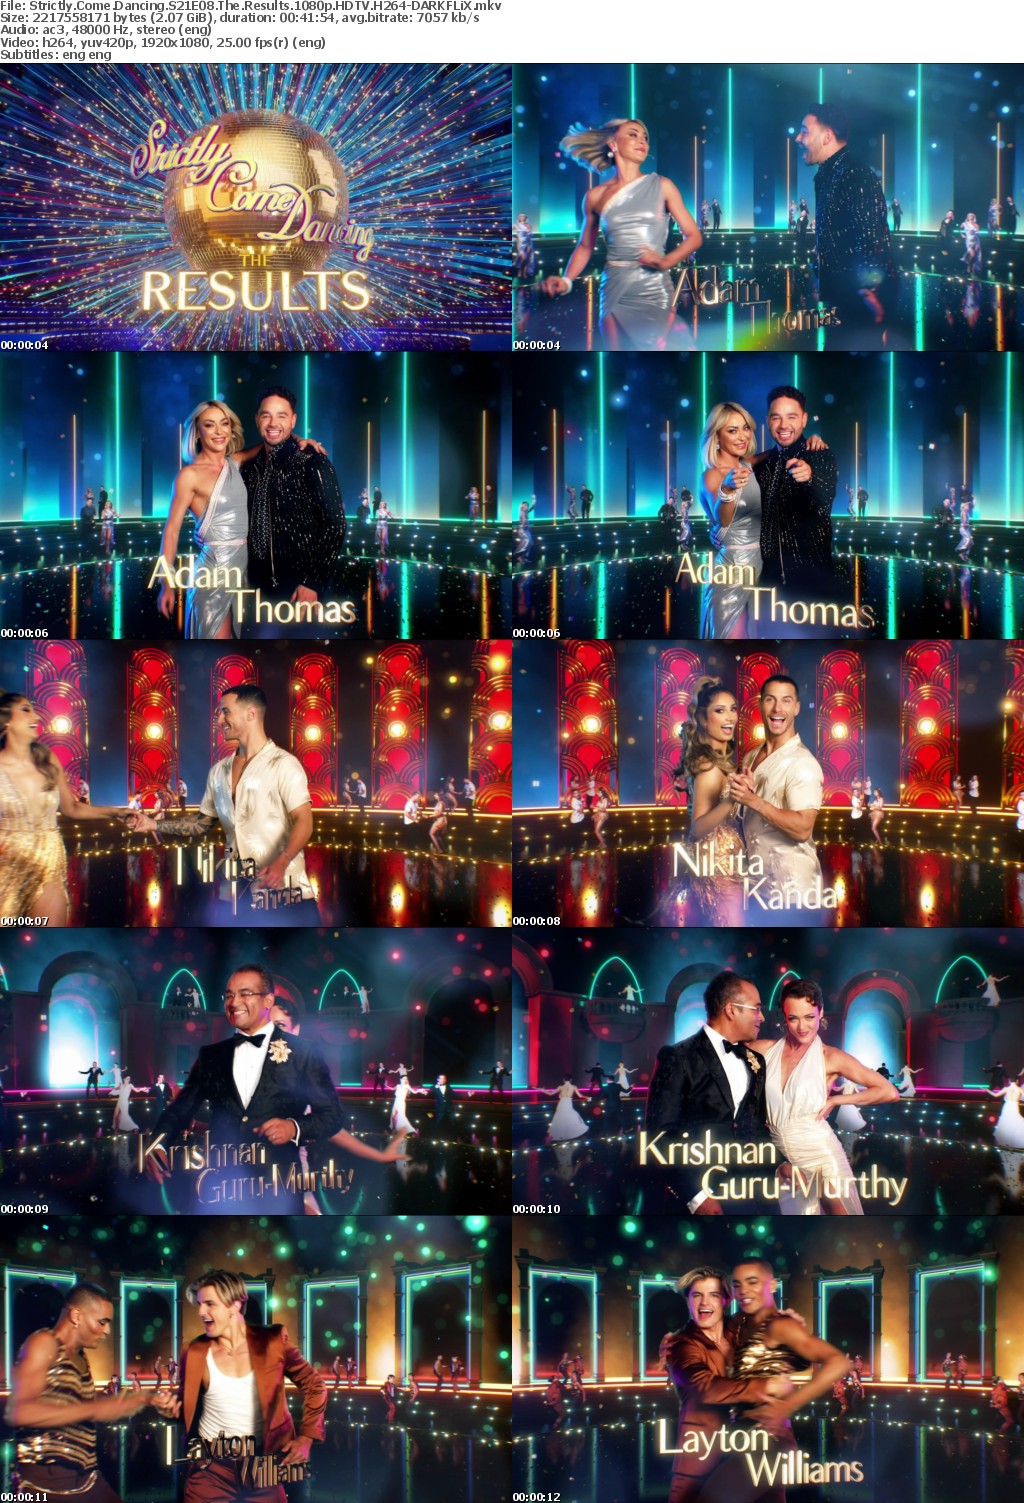 Strictly Come Dancing S21E08 The Results 1080p HDTV H264-DARKFLiX